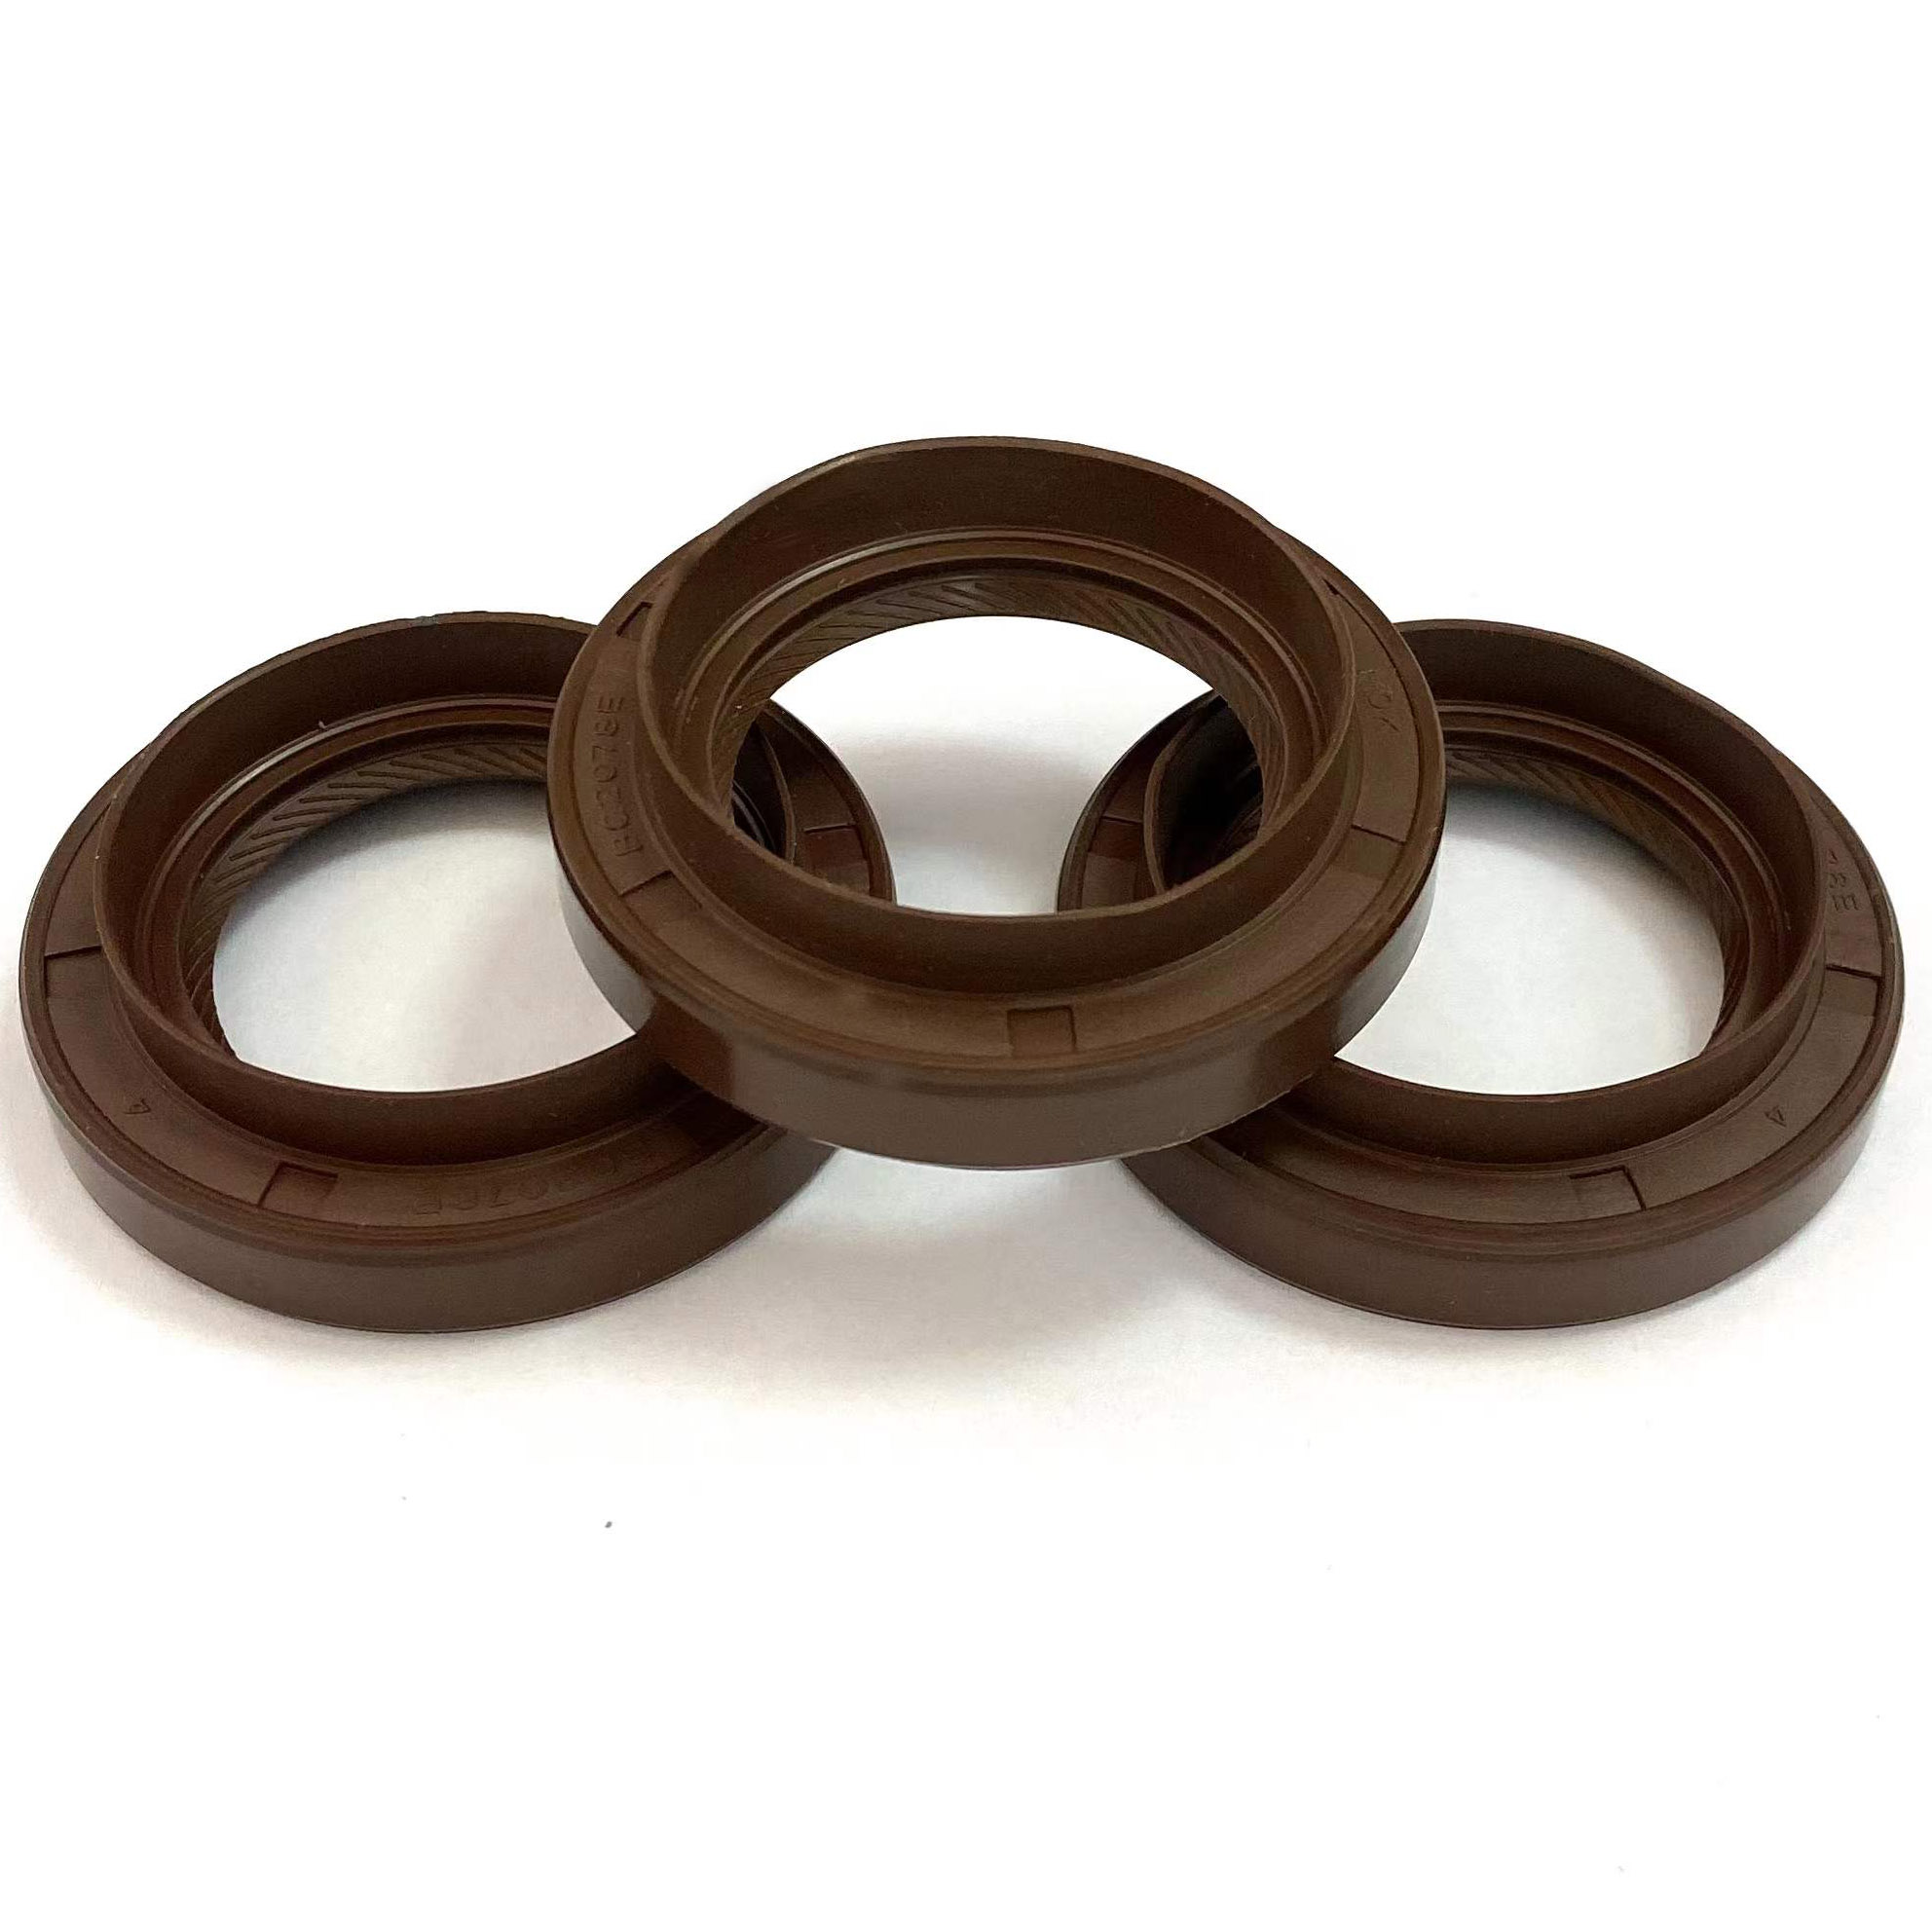 XTSEAO Size34*54*9/15.5 Differential oil seal for HONDA OEM 91207PH8005